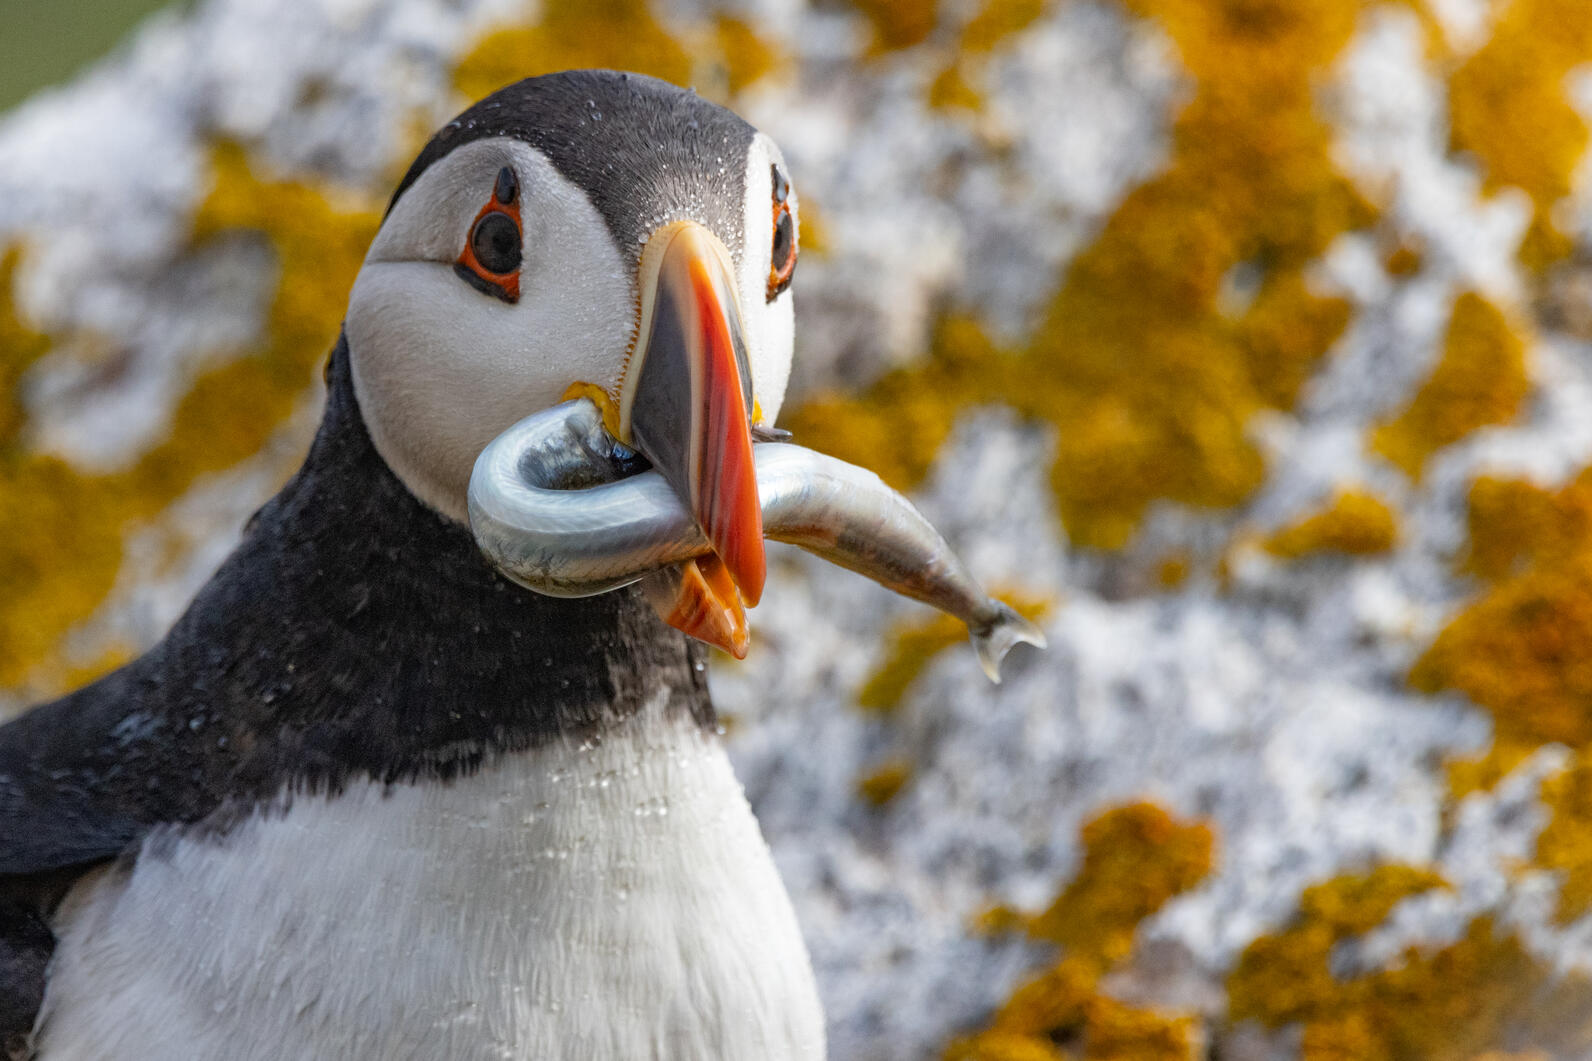 HU20 is the oldest living puffin